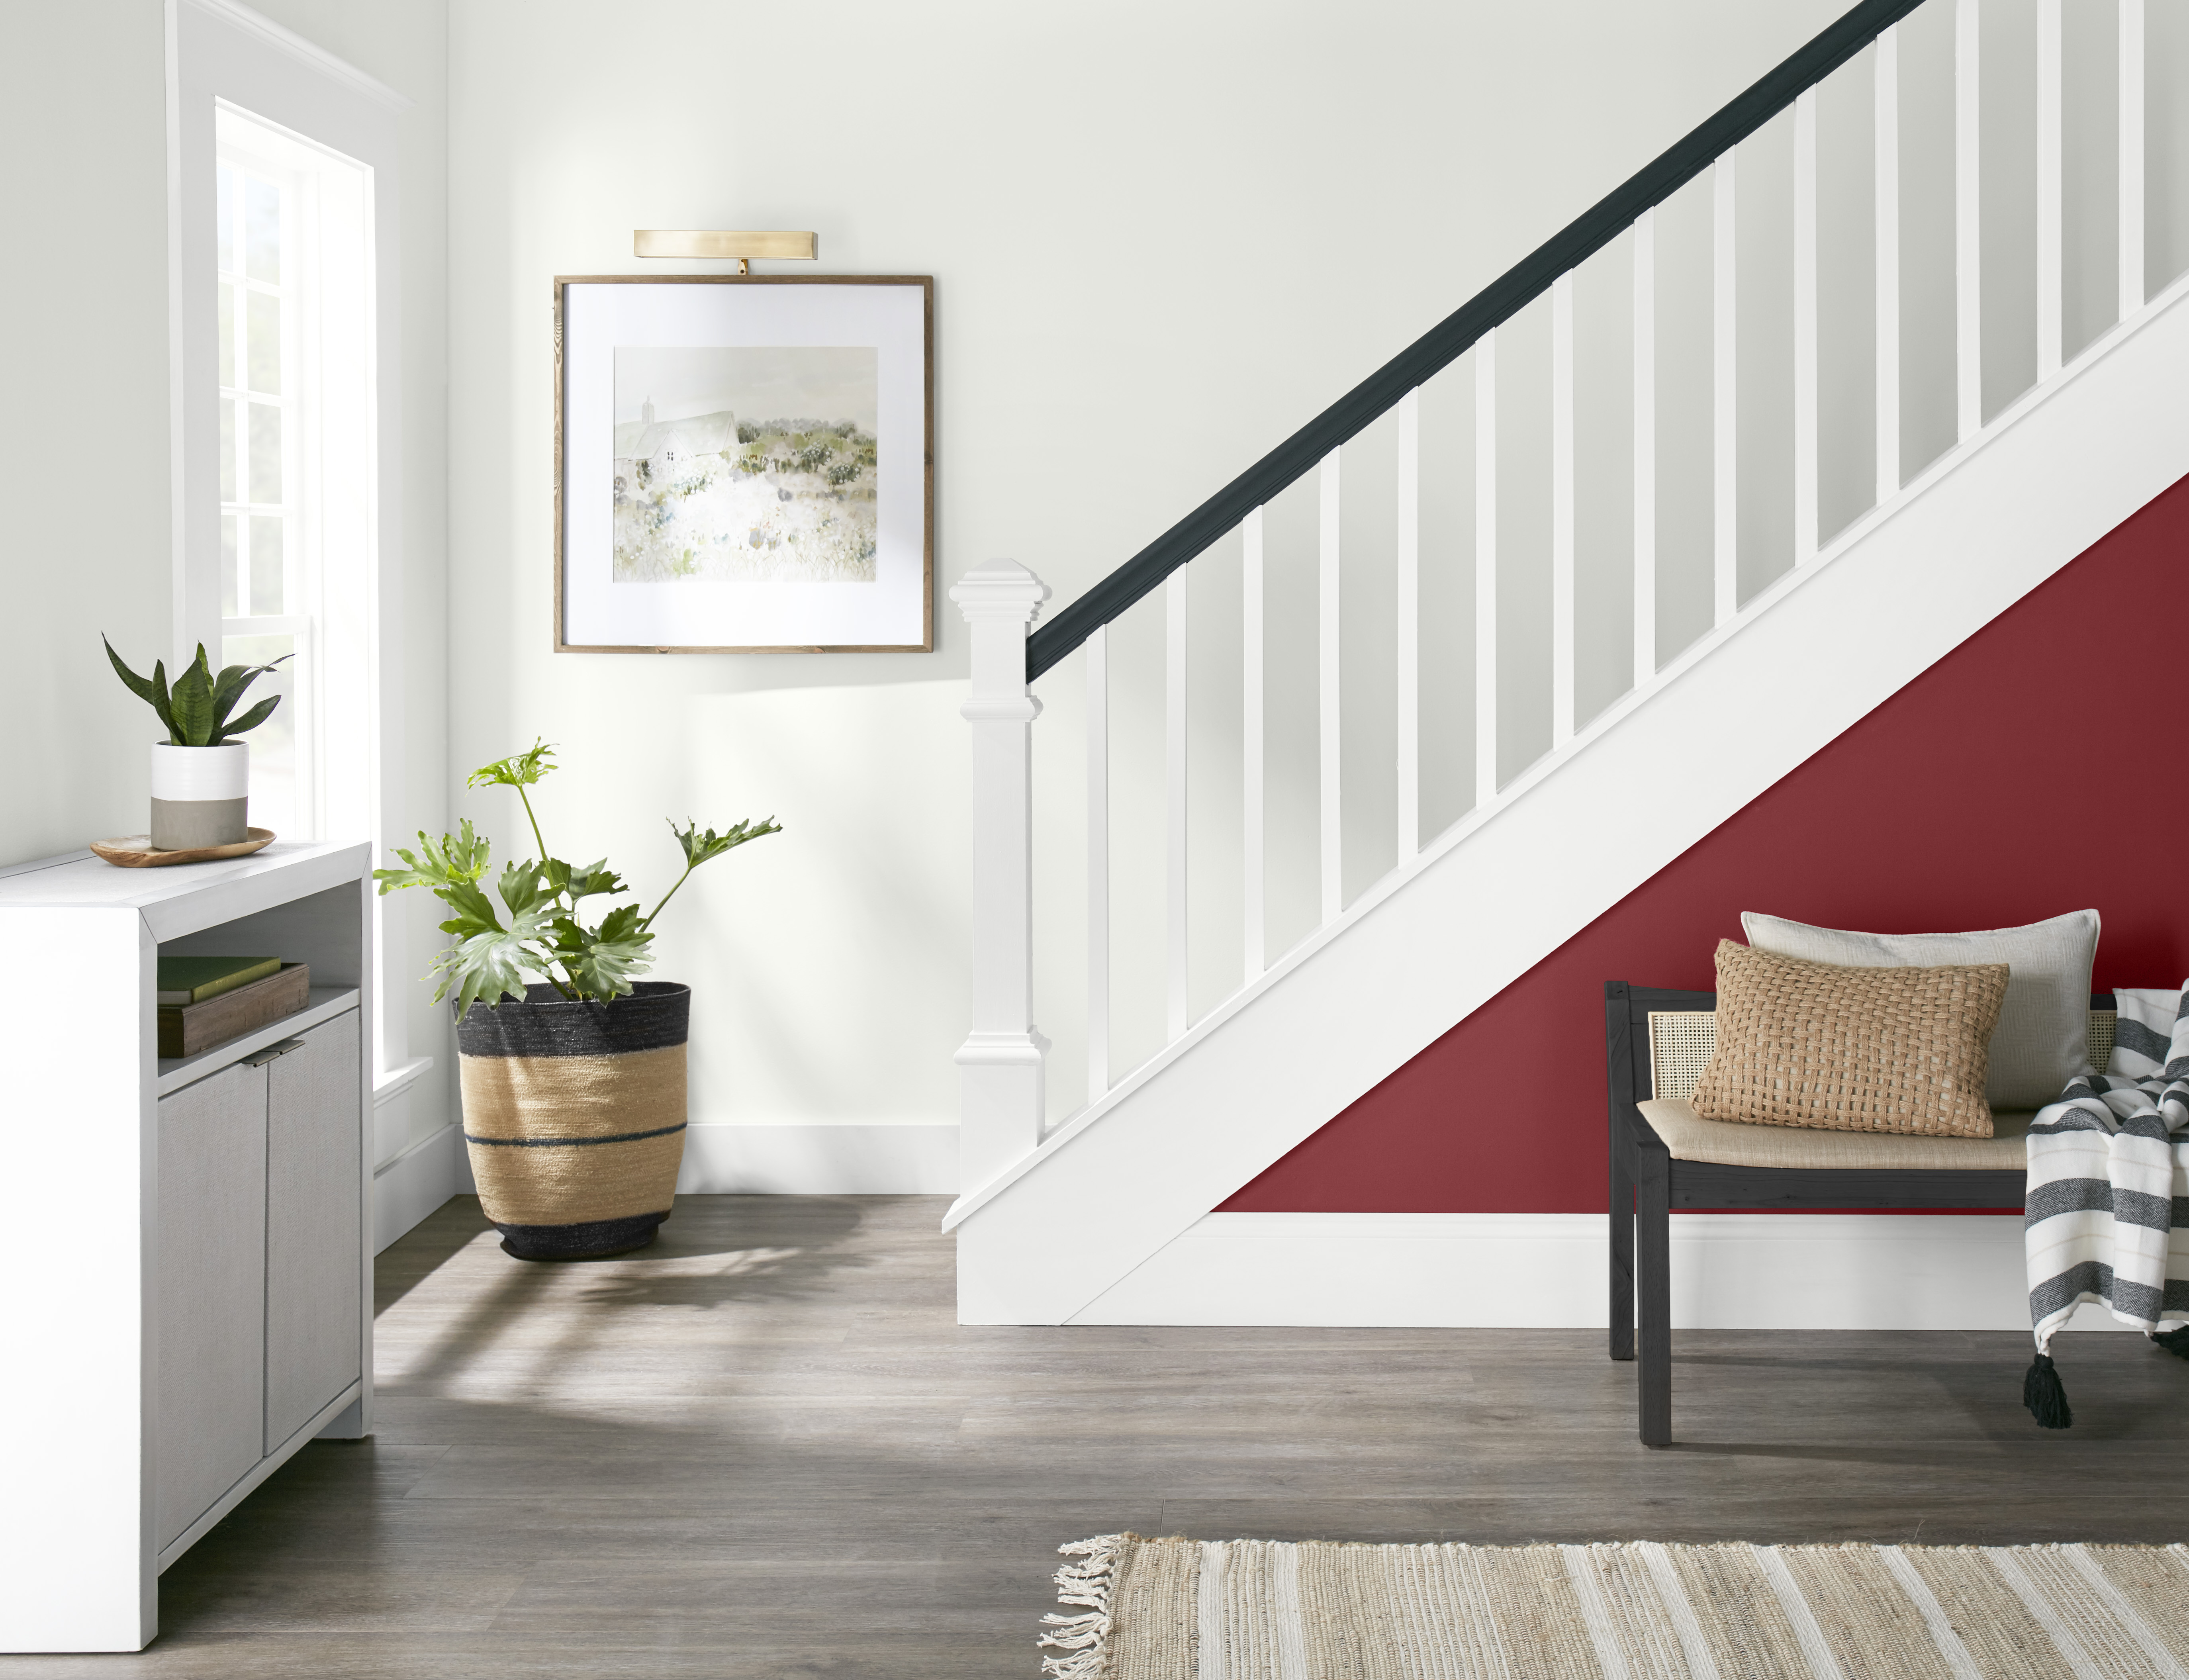 A bright white entry area with the side of the staircase painted in a deep red colour